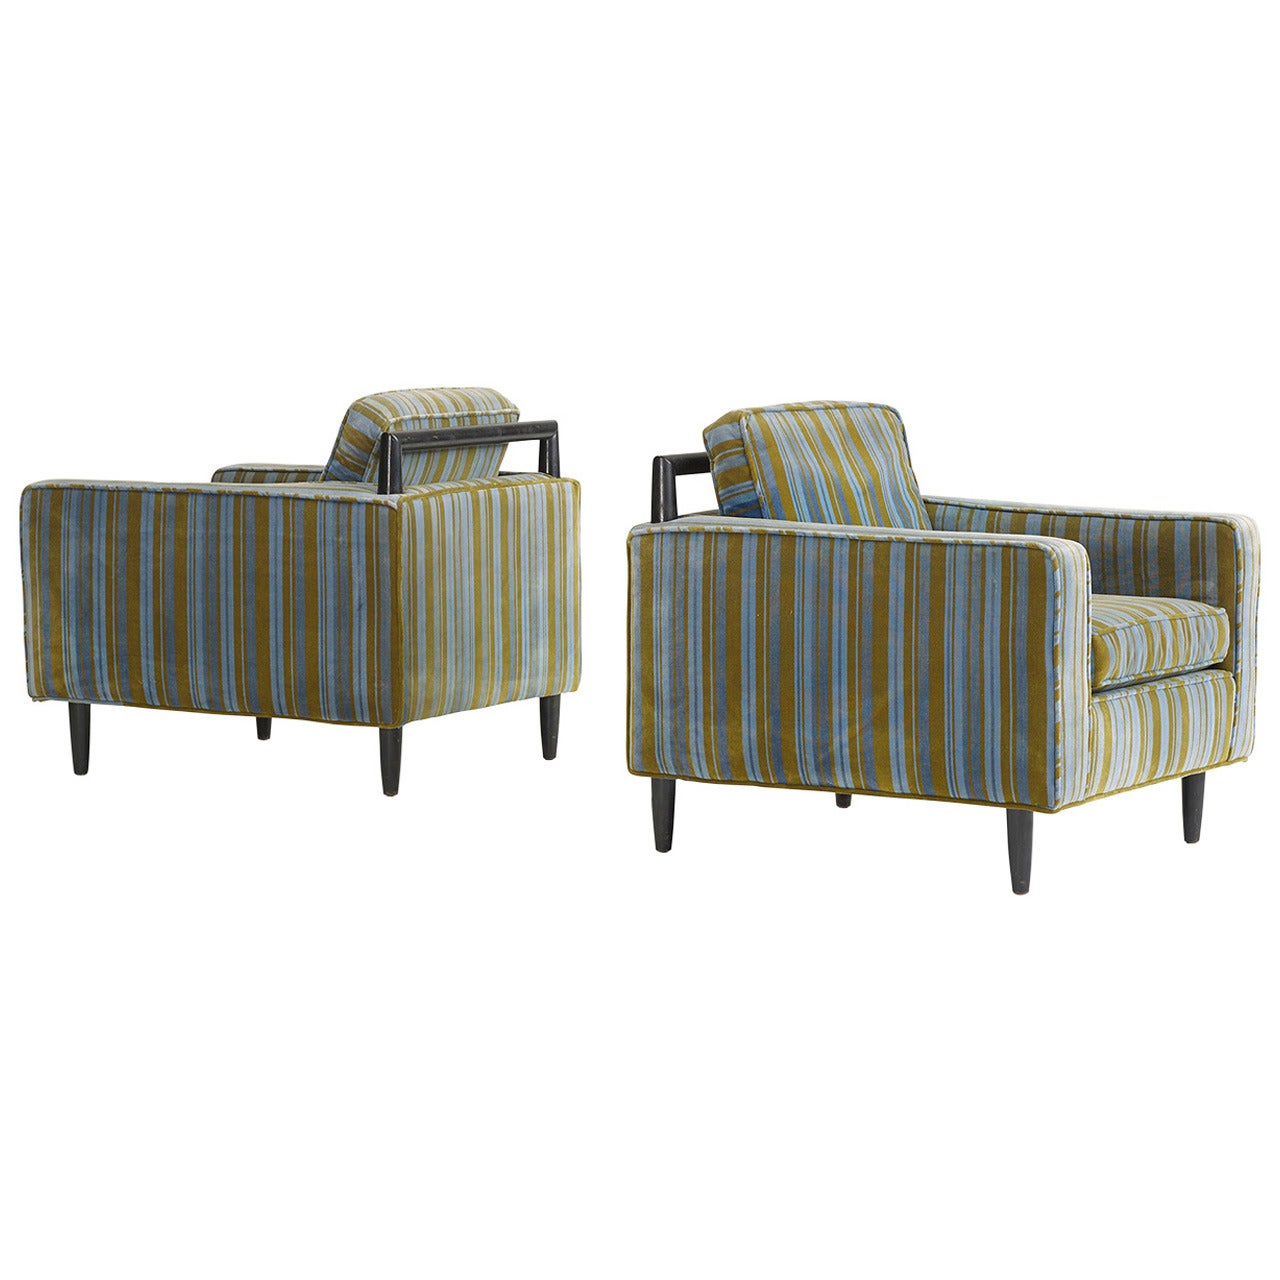 Pair of Lounge Chairs Attributed to Harvey Probber